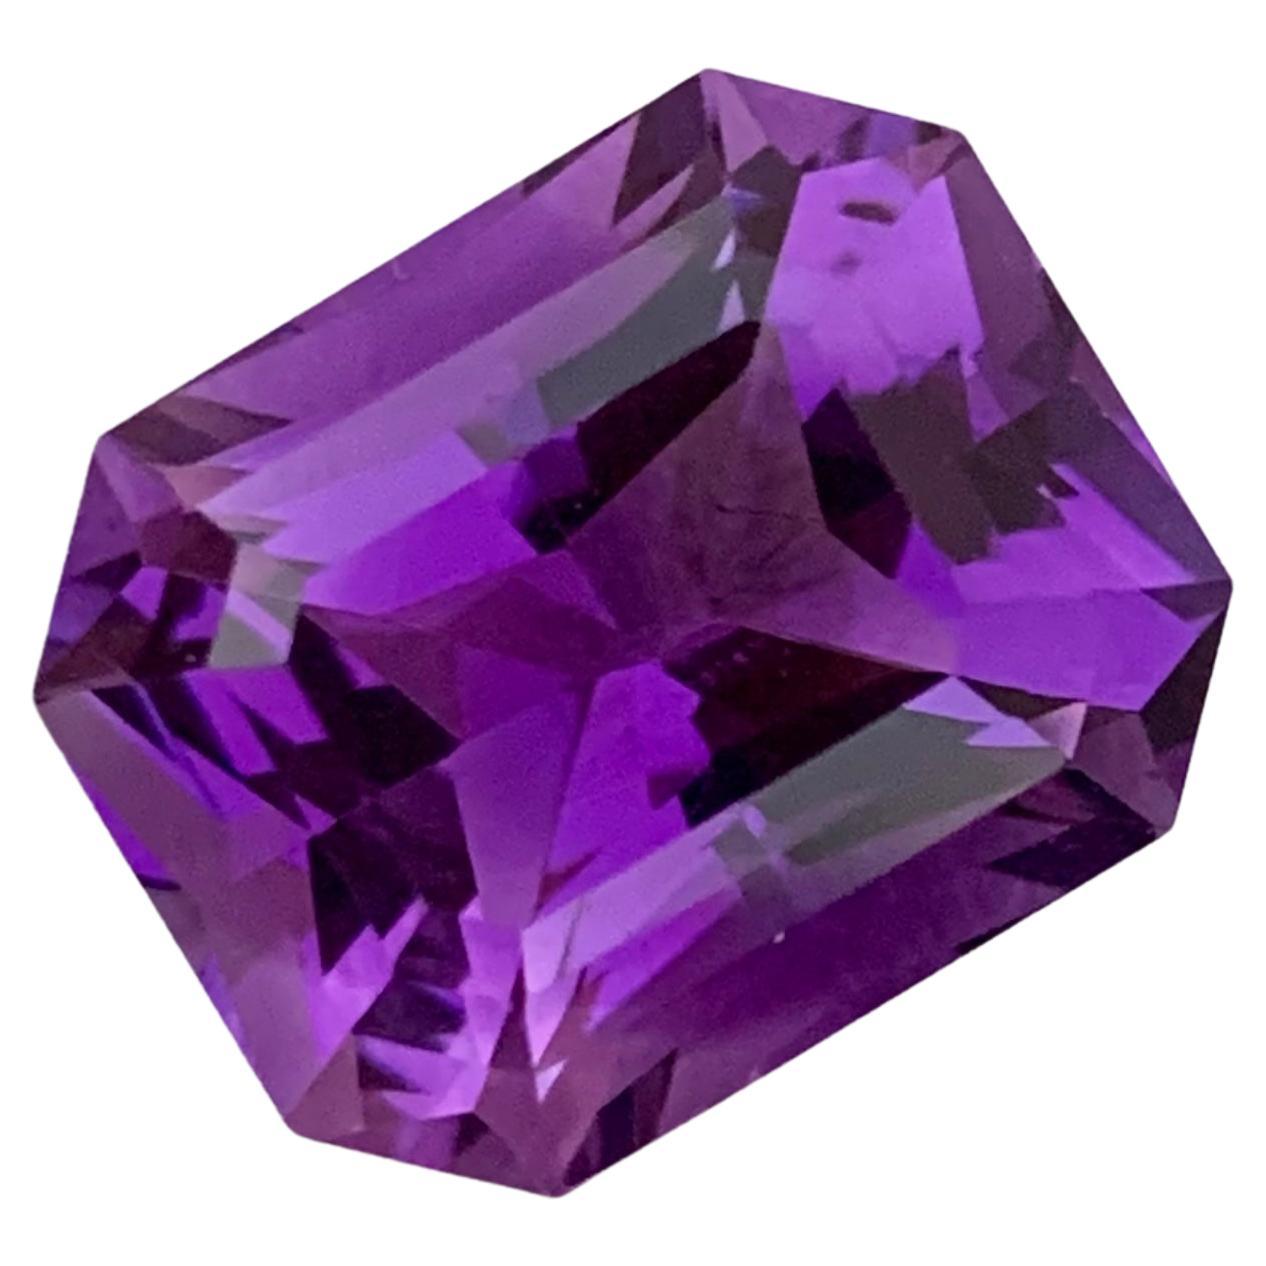 8.45 Carats Natural Loose Purple Amethyst Gemstone For Jewelry Making 